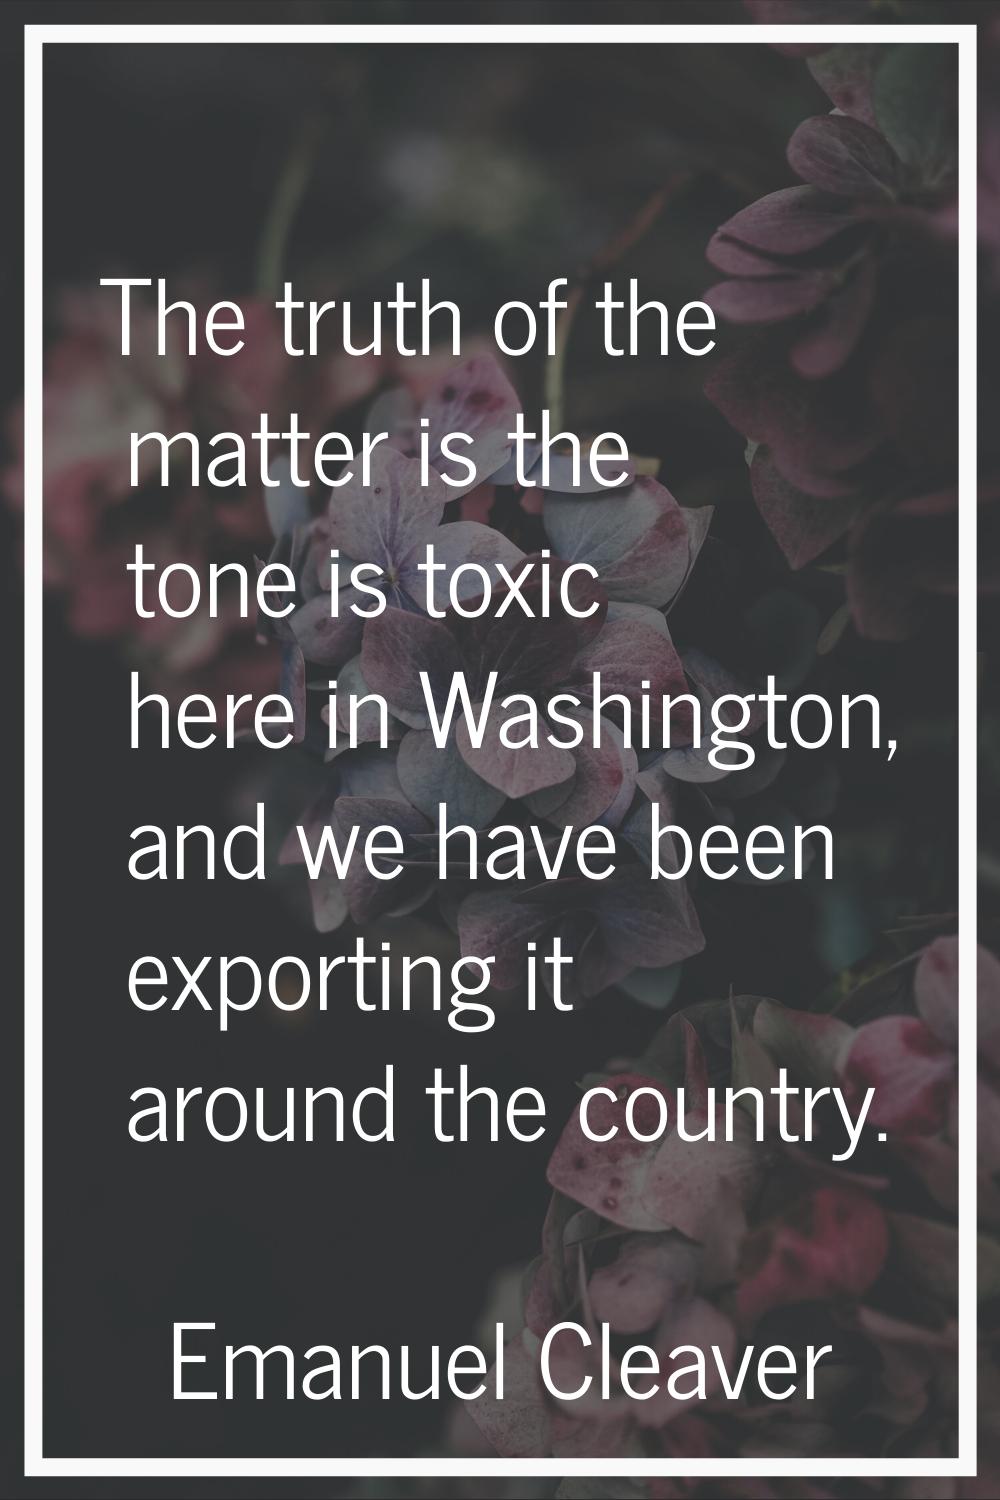 The truth of the matter is the tone is toxic here in Washington, and we have been exporting it arou